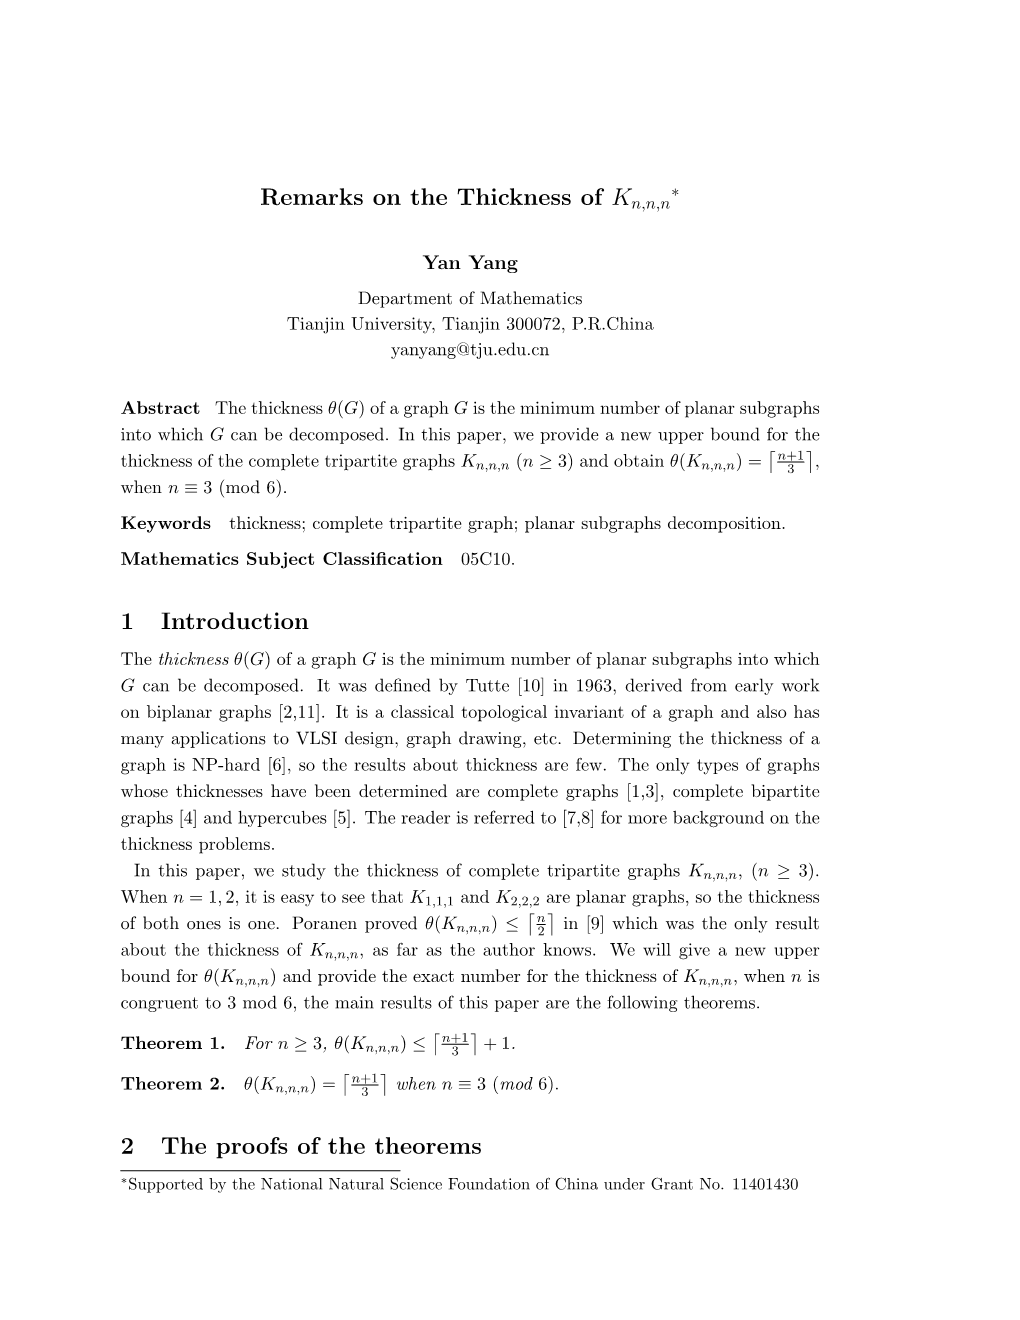 Remarks on the Thickness of Kn,N,N 1 Introduction 2 the Proofs Of